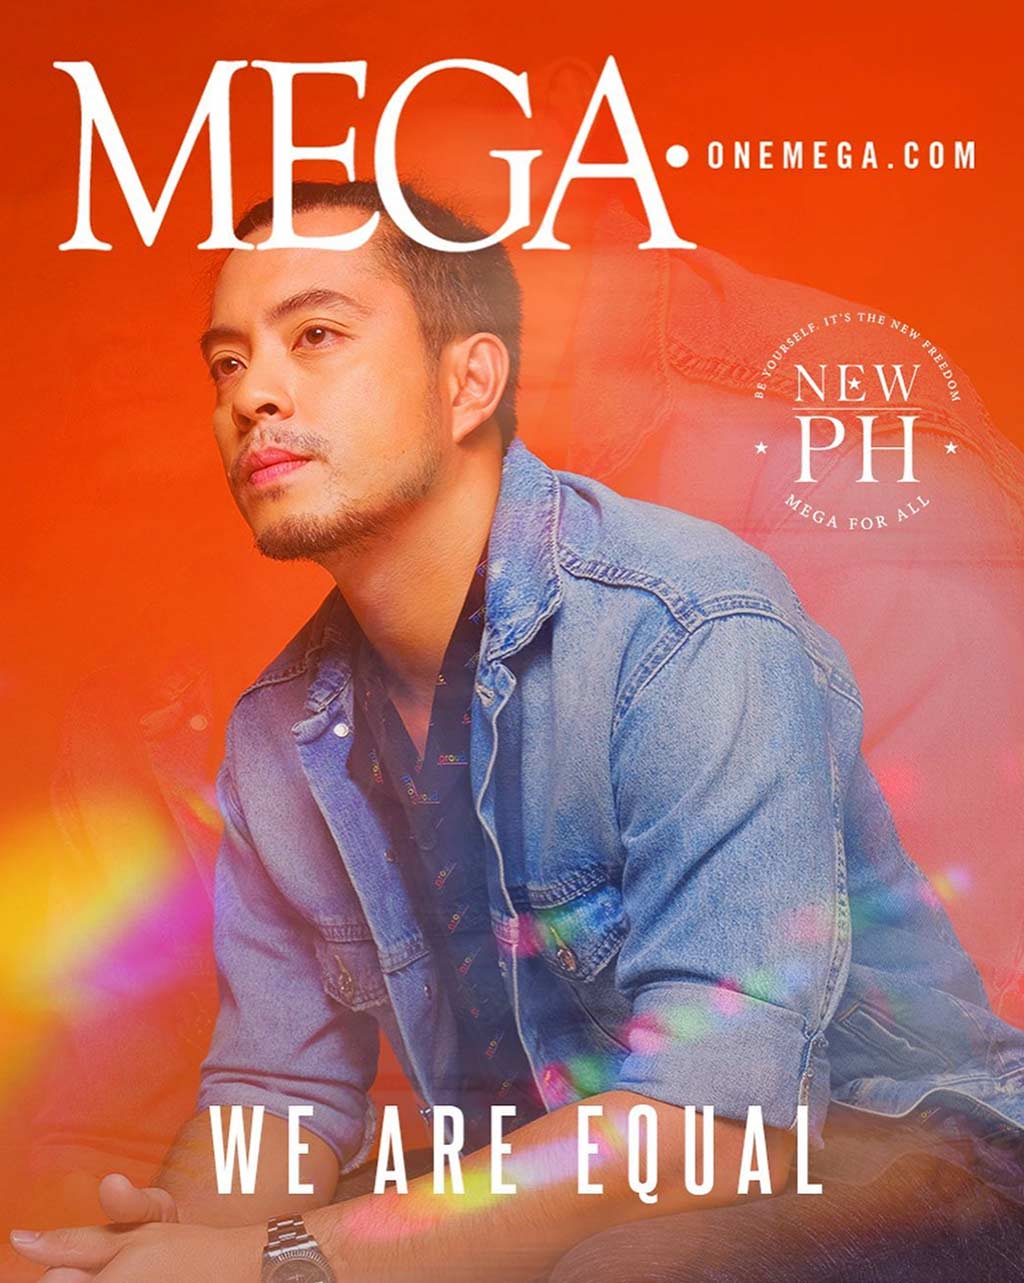 See All The Personalities Who Participated In The #MEGAEquality Campaign Jun Sunga